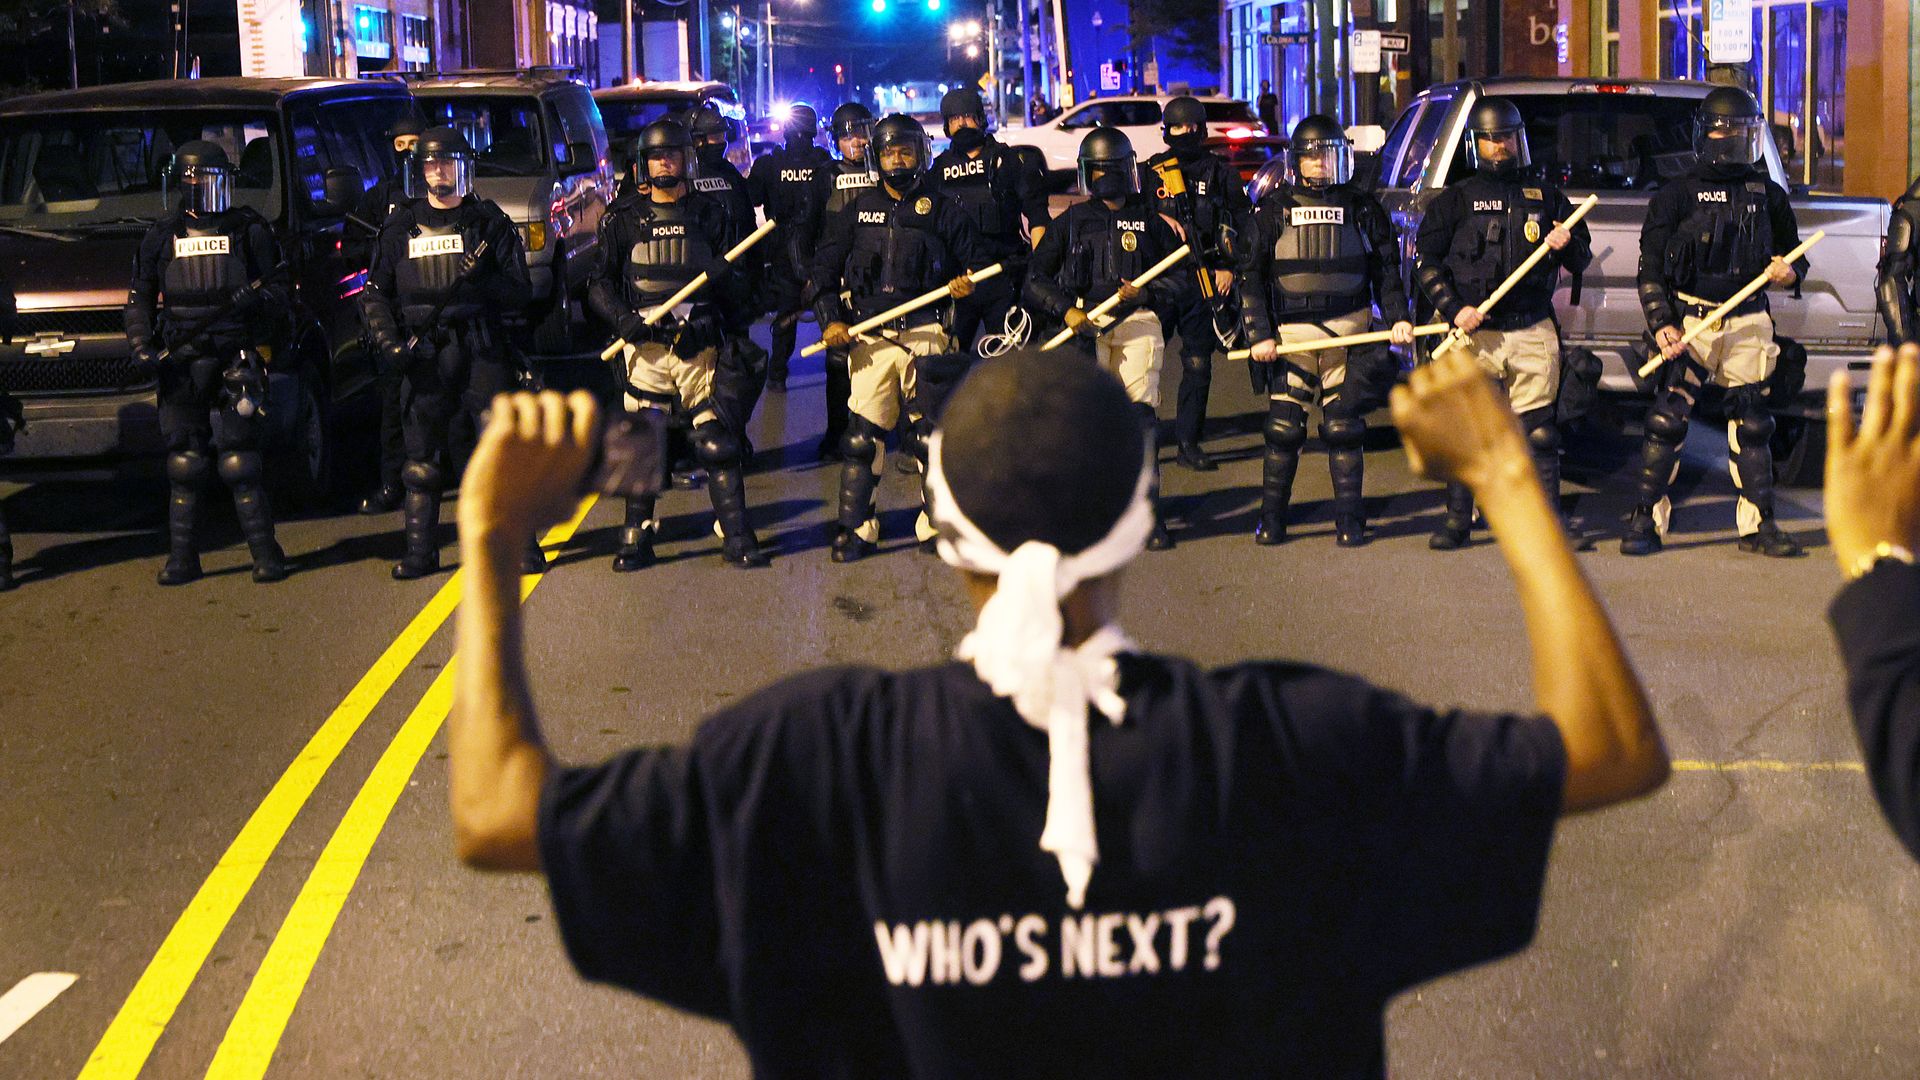 Photo of a protester wearing a shirt that says "Who's next" as they face off against police in riot gear